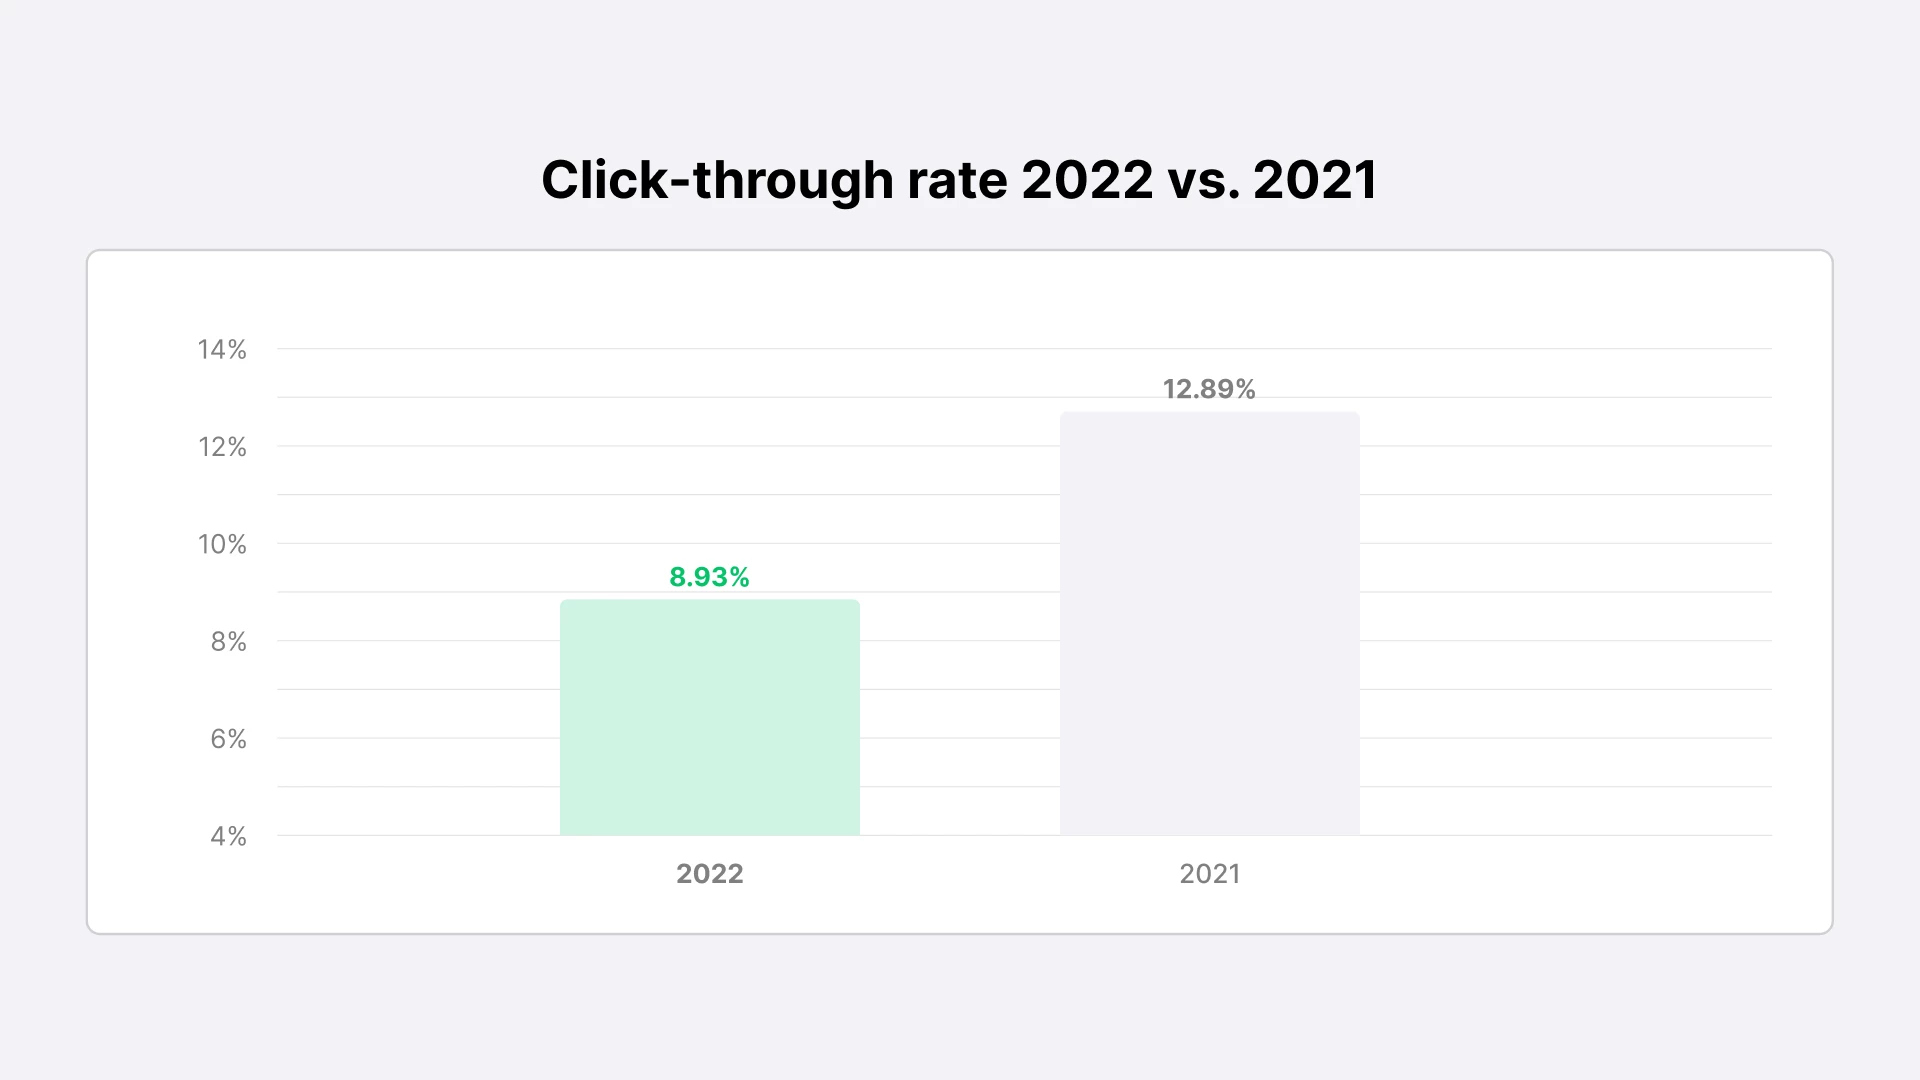 Email Marketing Benchmarks and Stats by Industry for 2023 - MailerLite